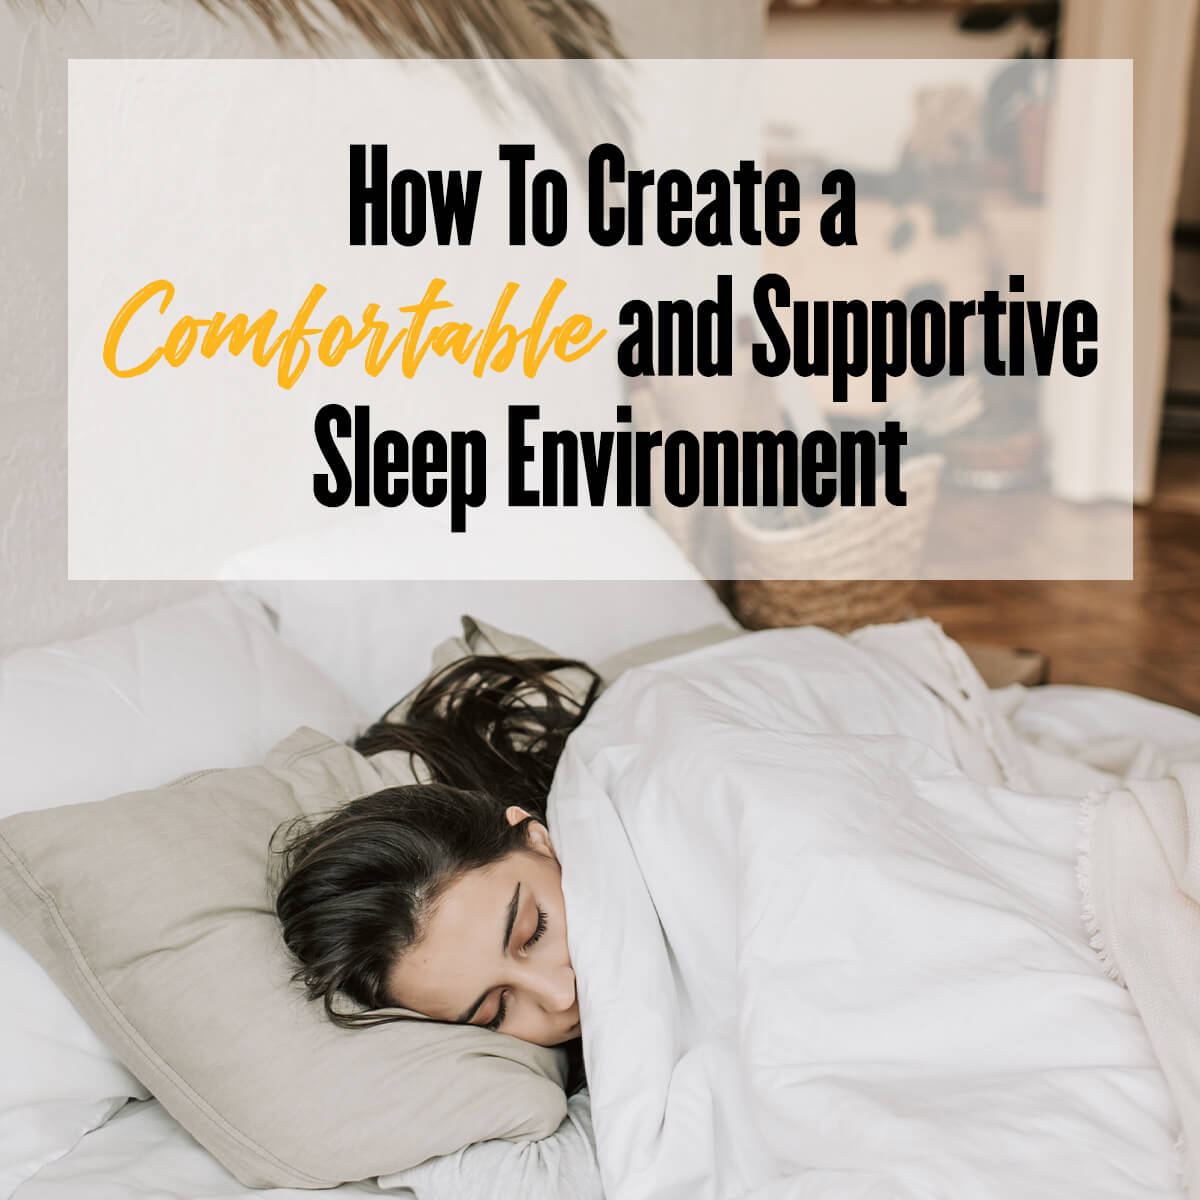 https://dropinblog.net/34245526/files/featured/How_To_Create_a_Comfortable_and_Supportive_Sleep_Environment_edited__1_.jpg